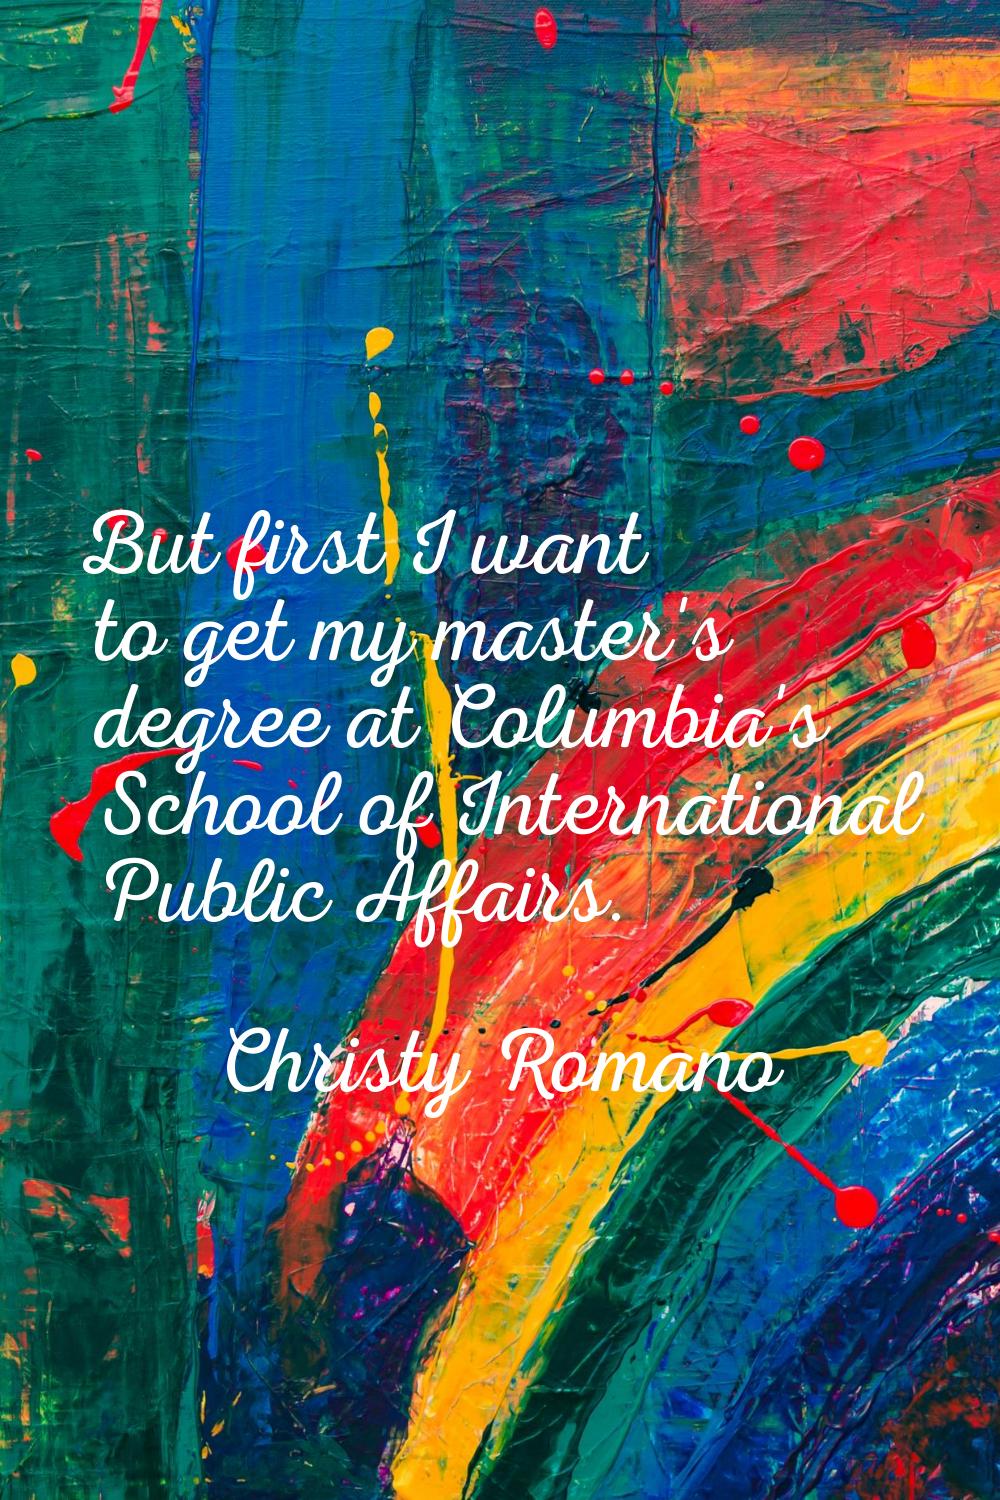 But first I want to get my master's degree at Columbia's School of International Public Affairs.